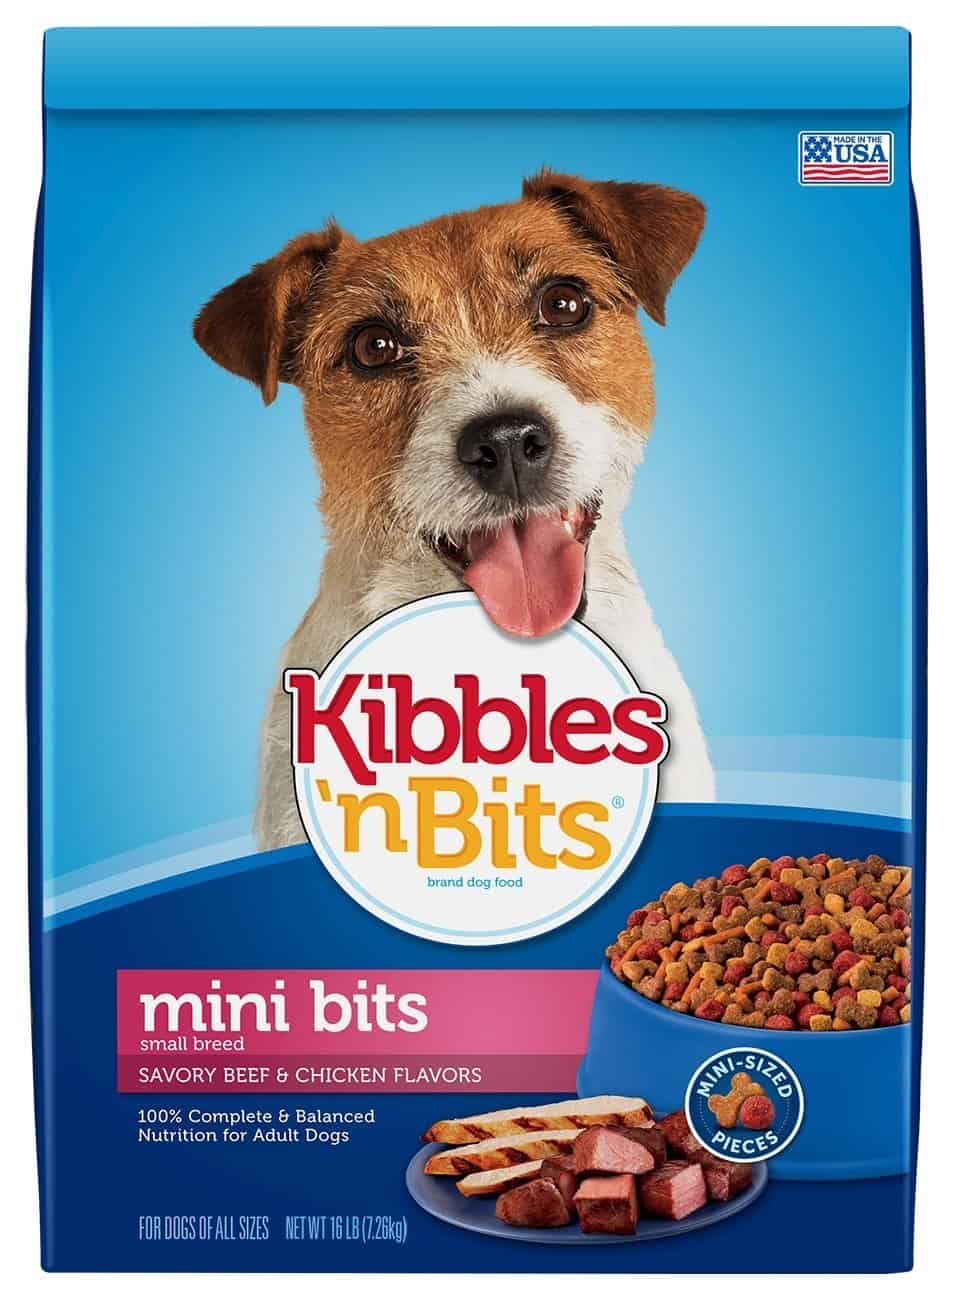 kibbles and bits steak and bacon